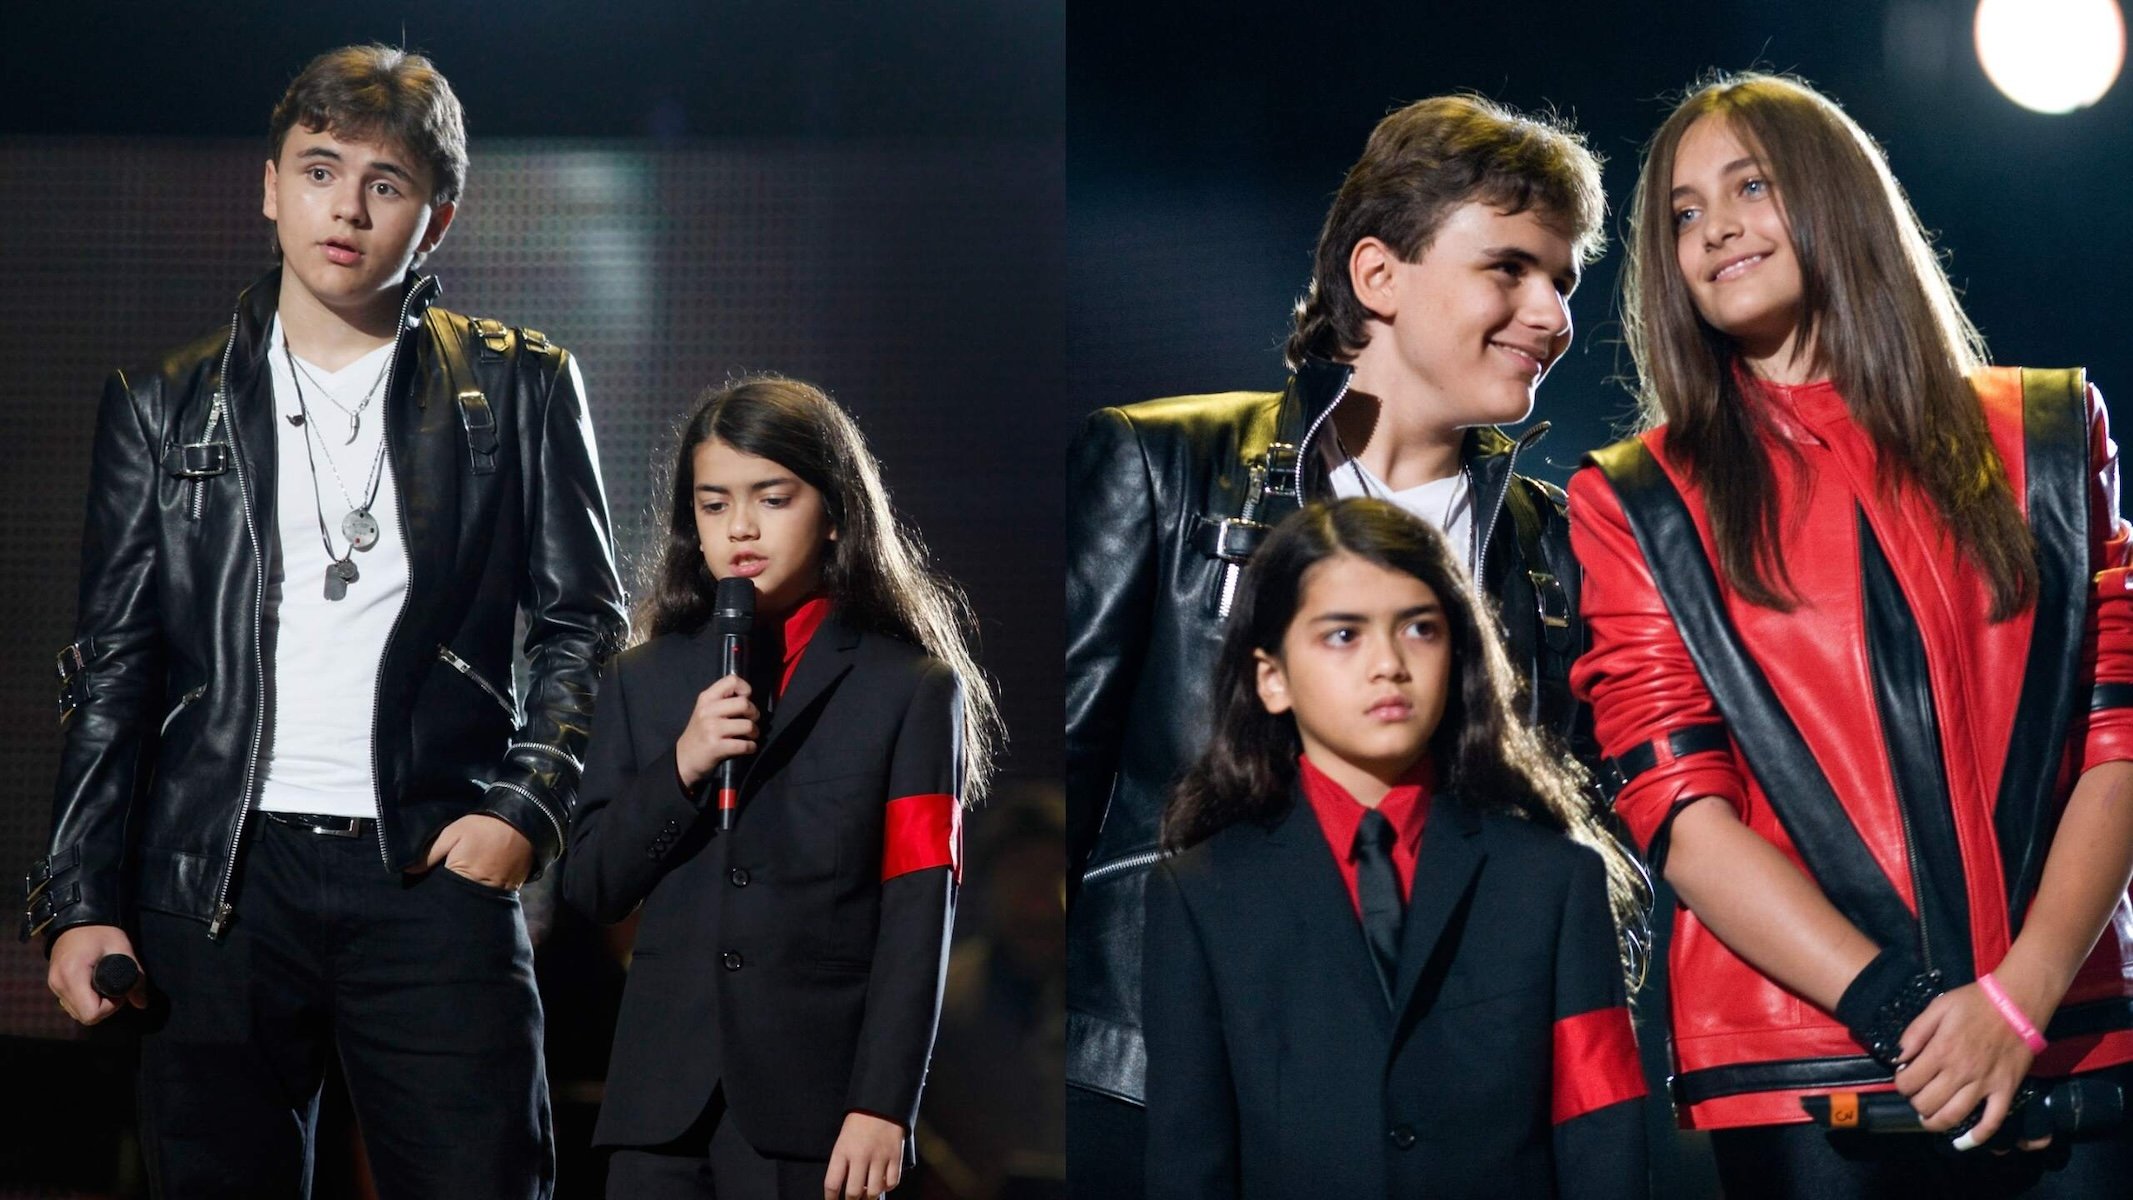 Michael Jackson's kids, Prince Jackson, Blanket Jackson, and Paris Jackson, appear on stage at the Michael Forever Tribute Concert in 2011